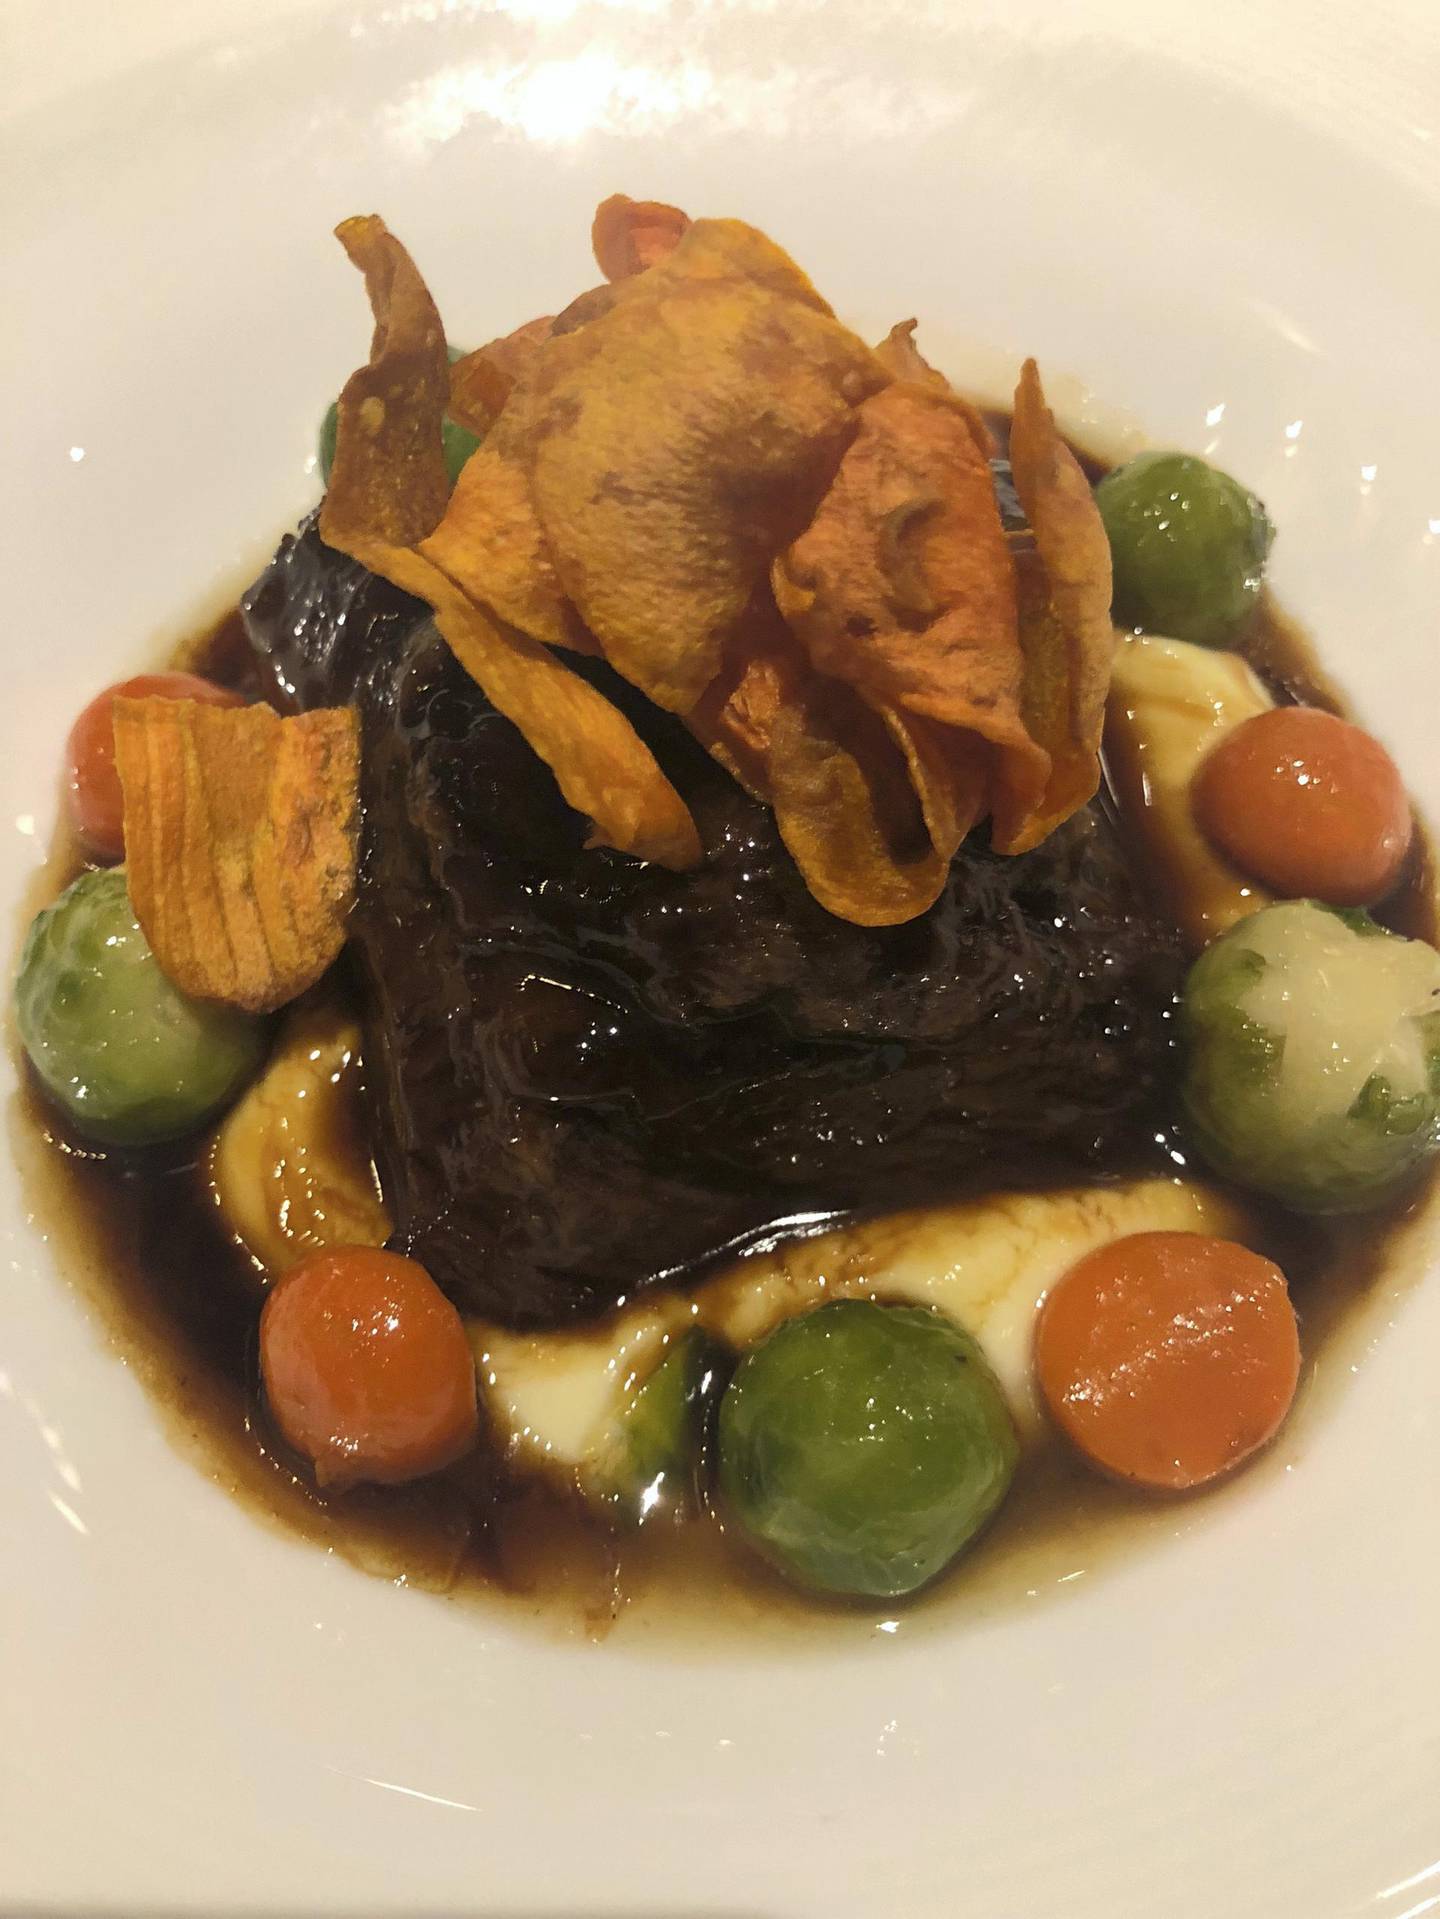 The braised short rib with potato puree, pulled beef and carrot crisp (Dh165) is one of the signature dishes at Hell's Kitchen Dubai. Melinda Healy